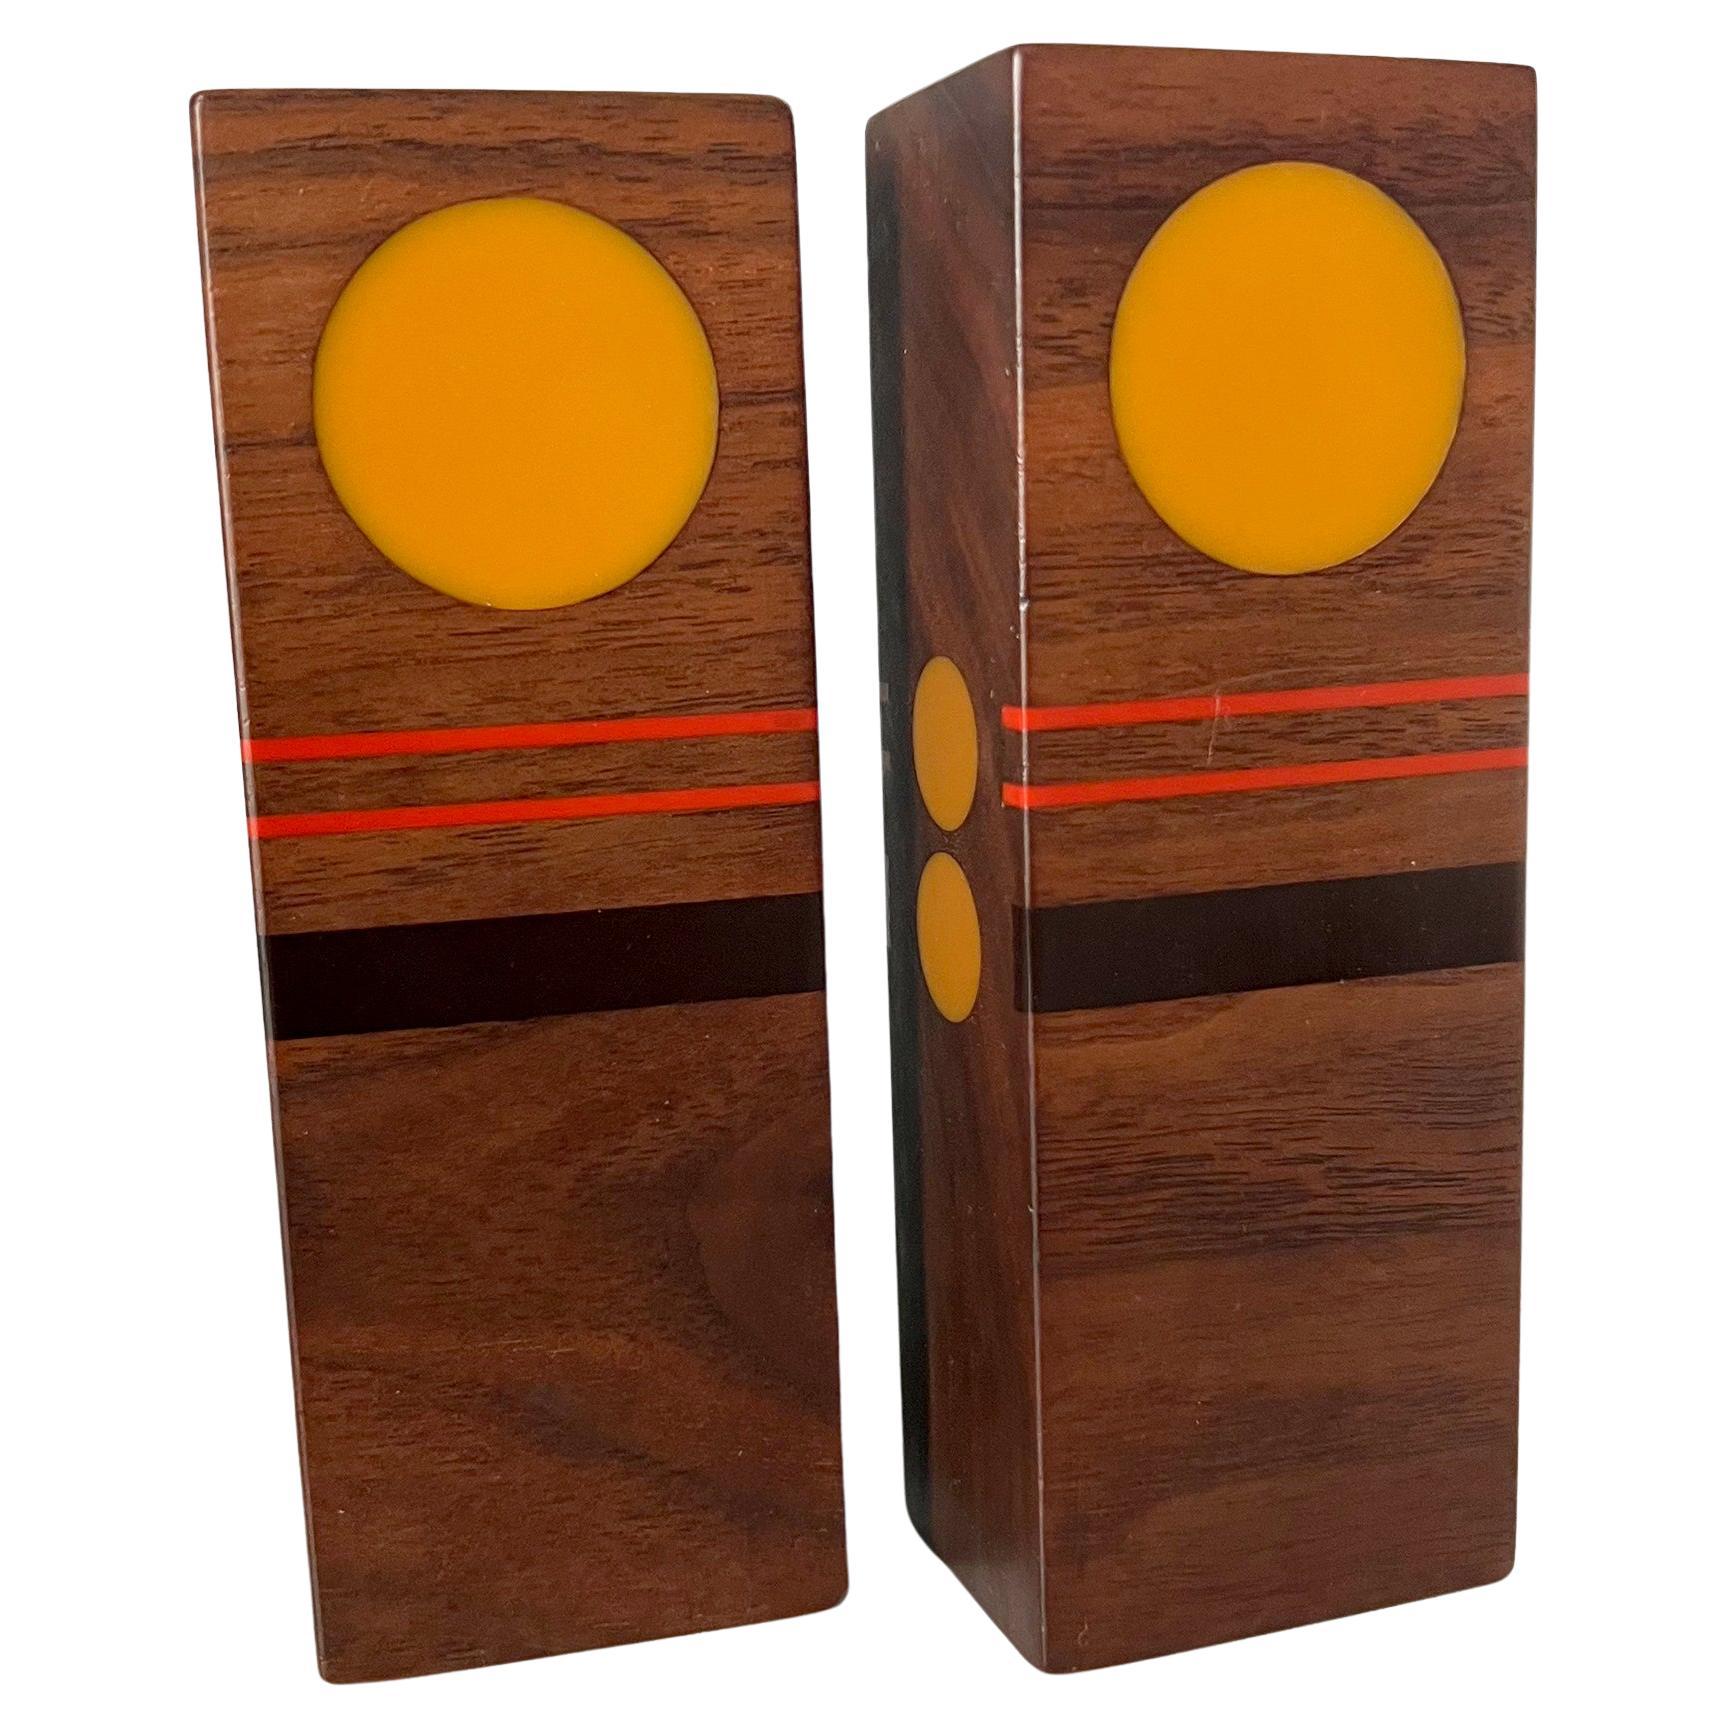 Handcrafted teak wood and resin salt and pepper shakers by  Robert McKeown of California, circa 1976. Shakers measure.5.25